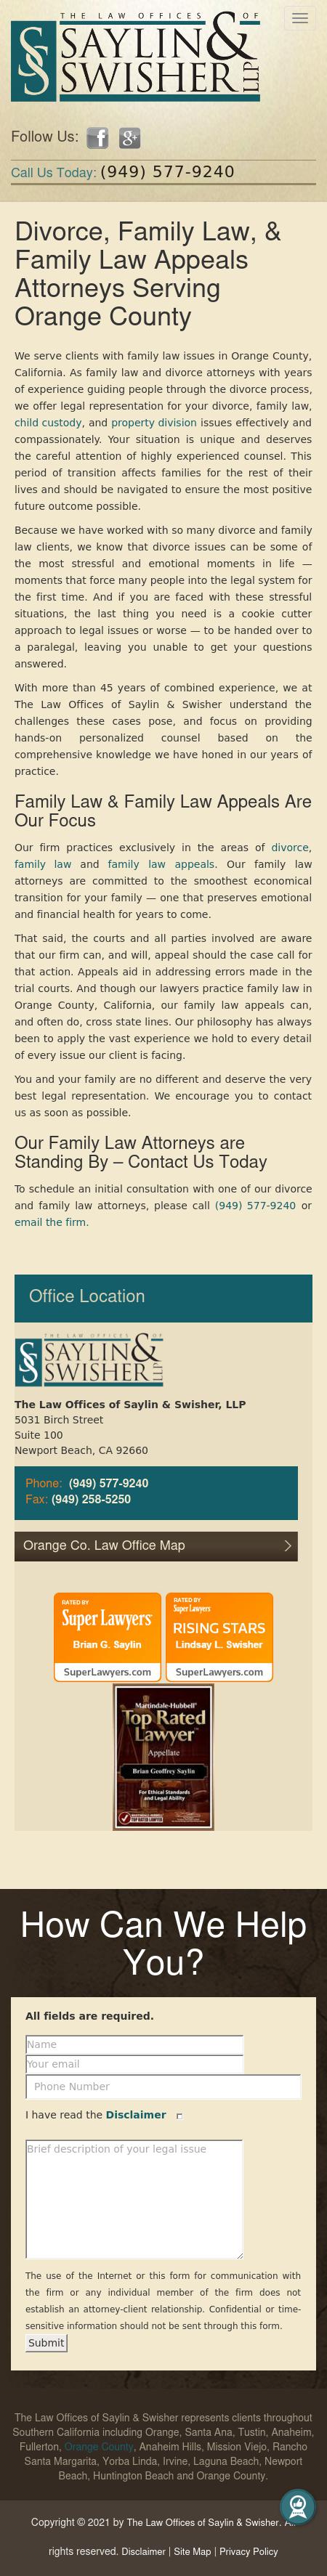 The Law Offices of Saylin & Swisher - Orange CA Lawyers